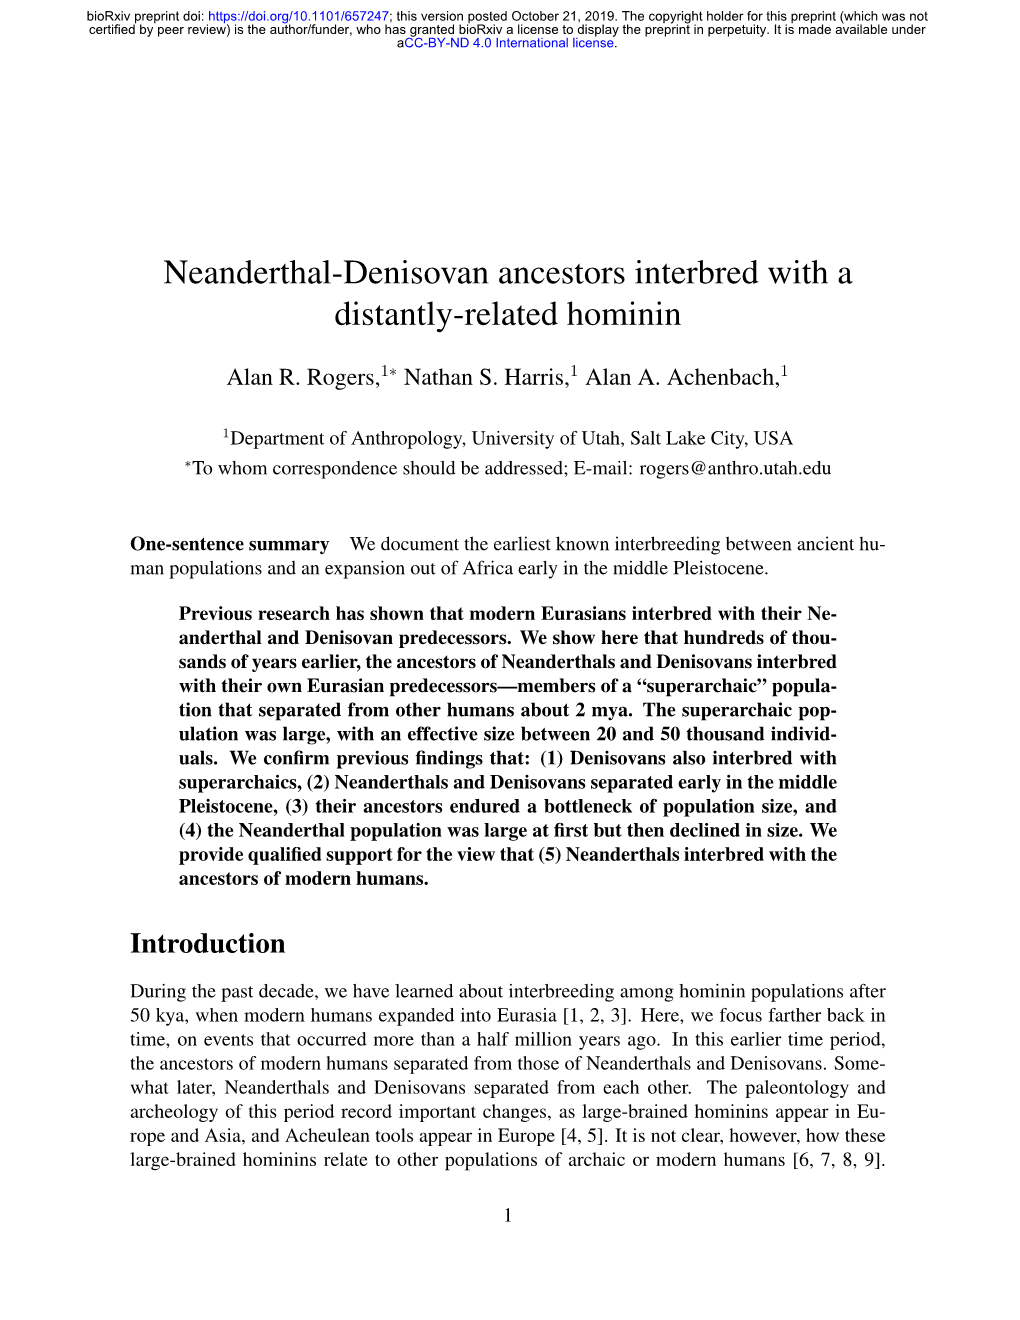 Neanderthal-Denisovan Ancestors Interbred with a Distantly-Related Hominin